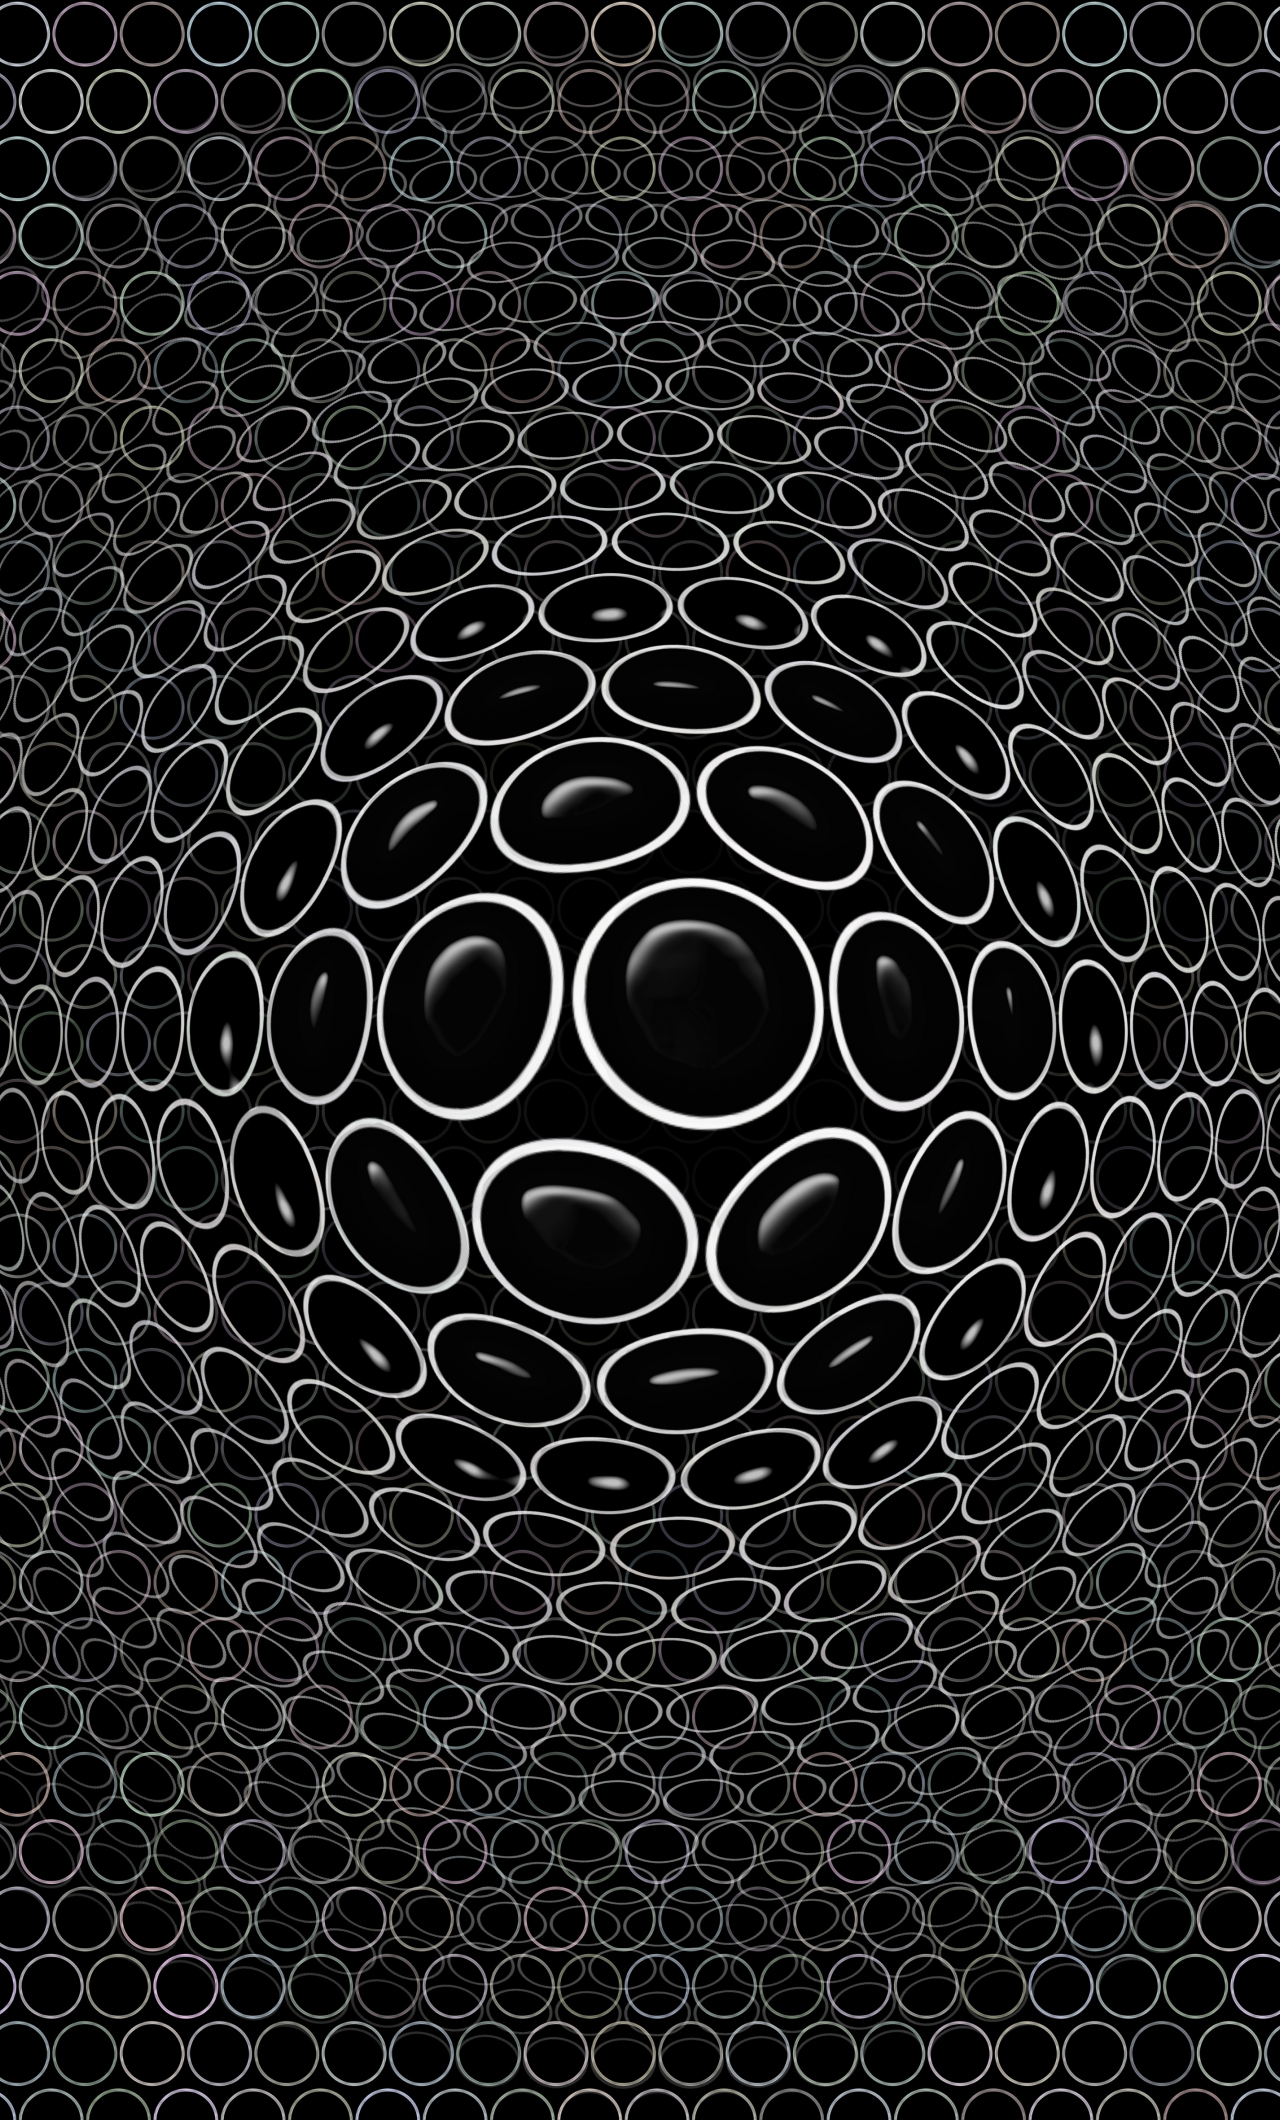 Download Optical Illusions Wallpaper APK v2.1 For Android